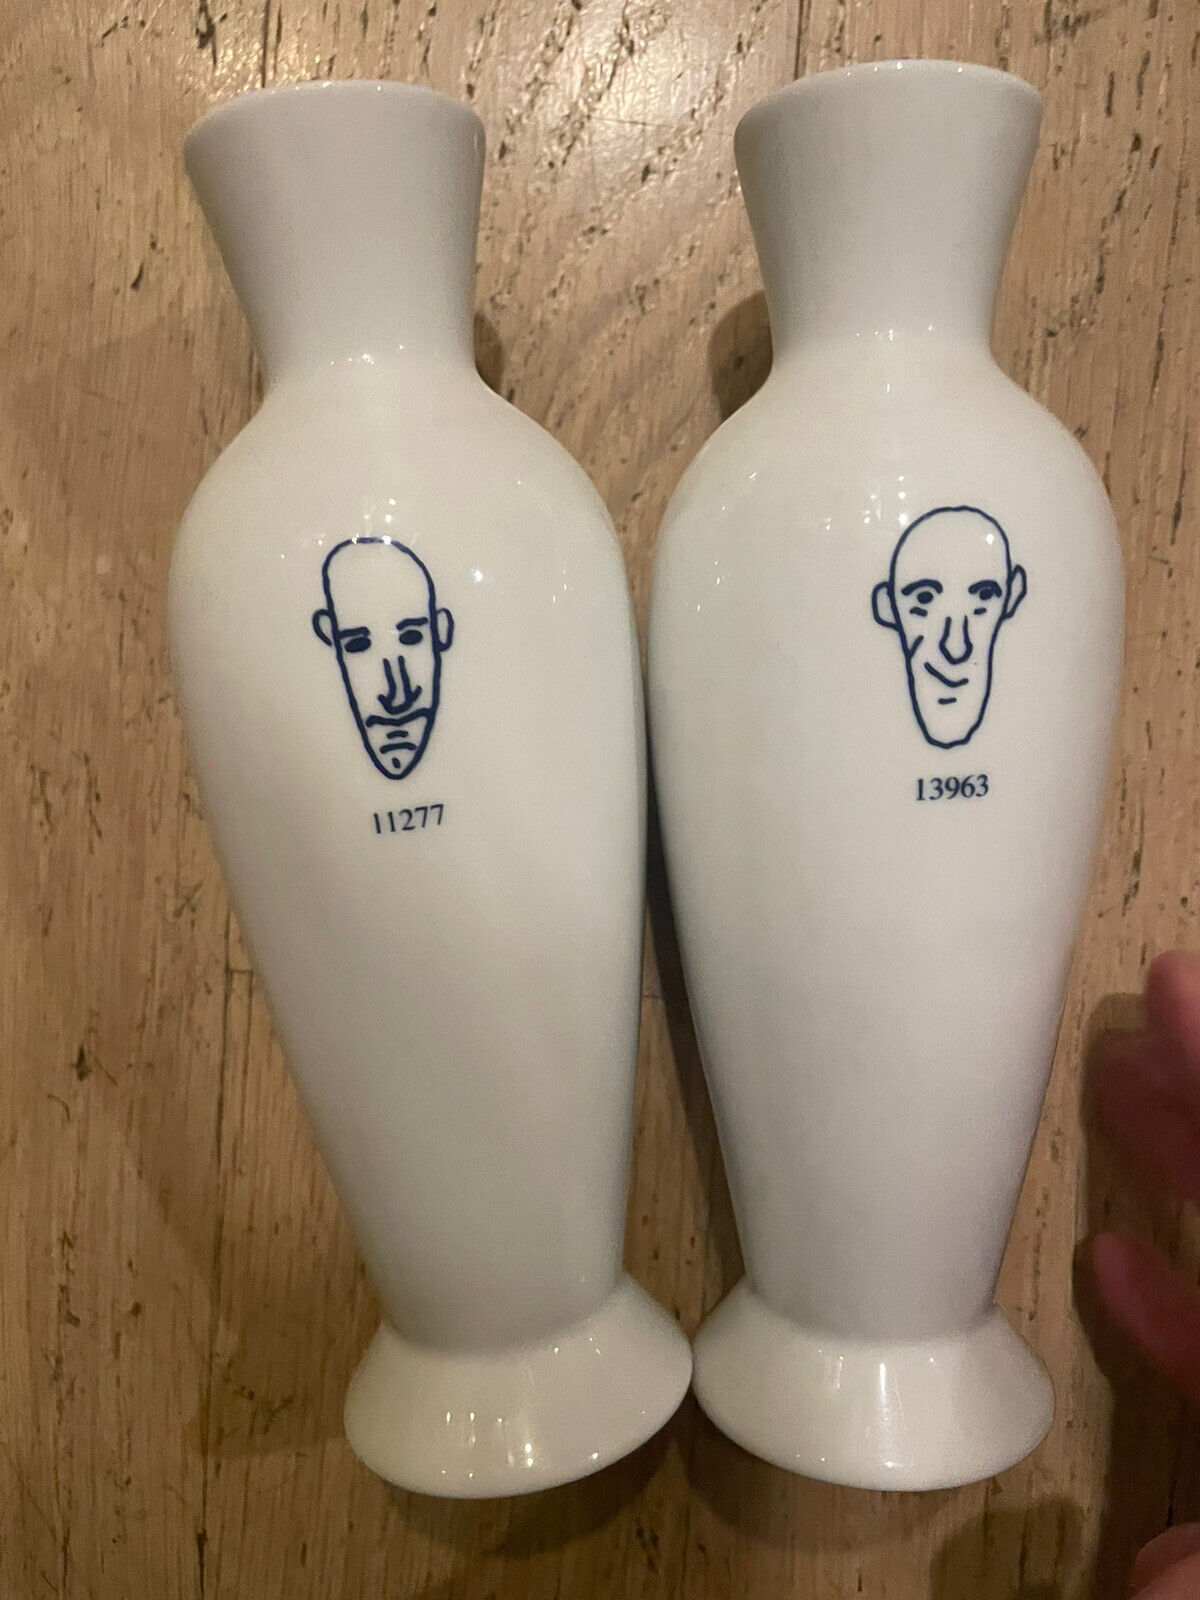 Alessi Andrea Branzi 6⅞ Tall Genetic Tales Porcelain Face Vases (2) #11277/13963